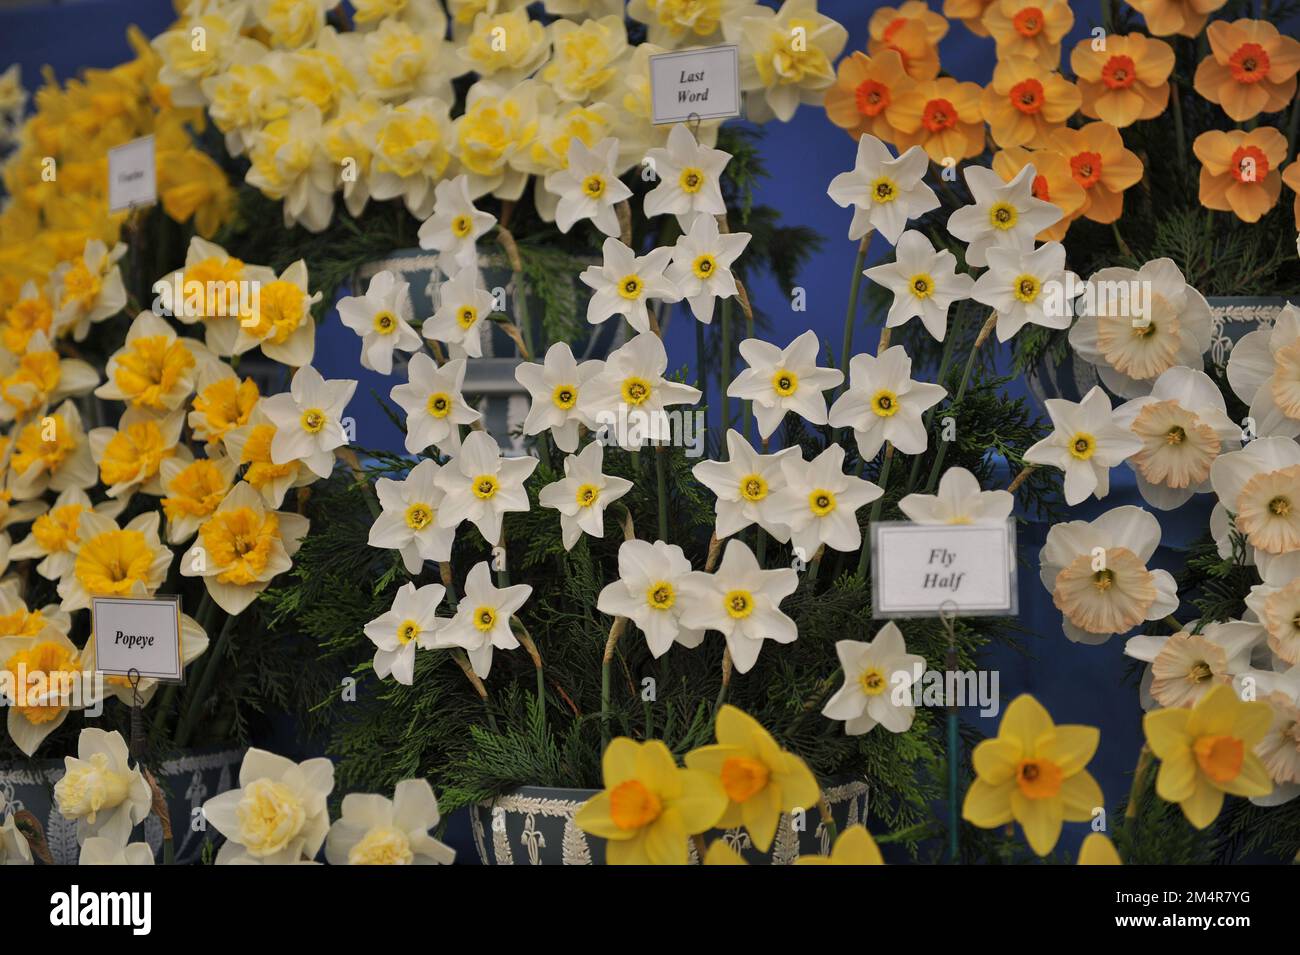 A bouquet of white and yellow Small-Cupped daffodils (Narcissus) Last Word on an exhibition in May Stock Photo